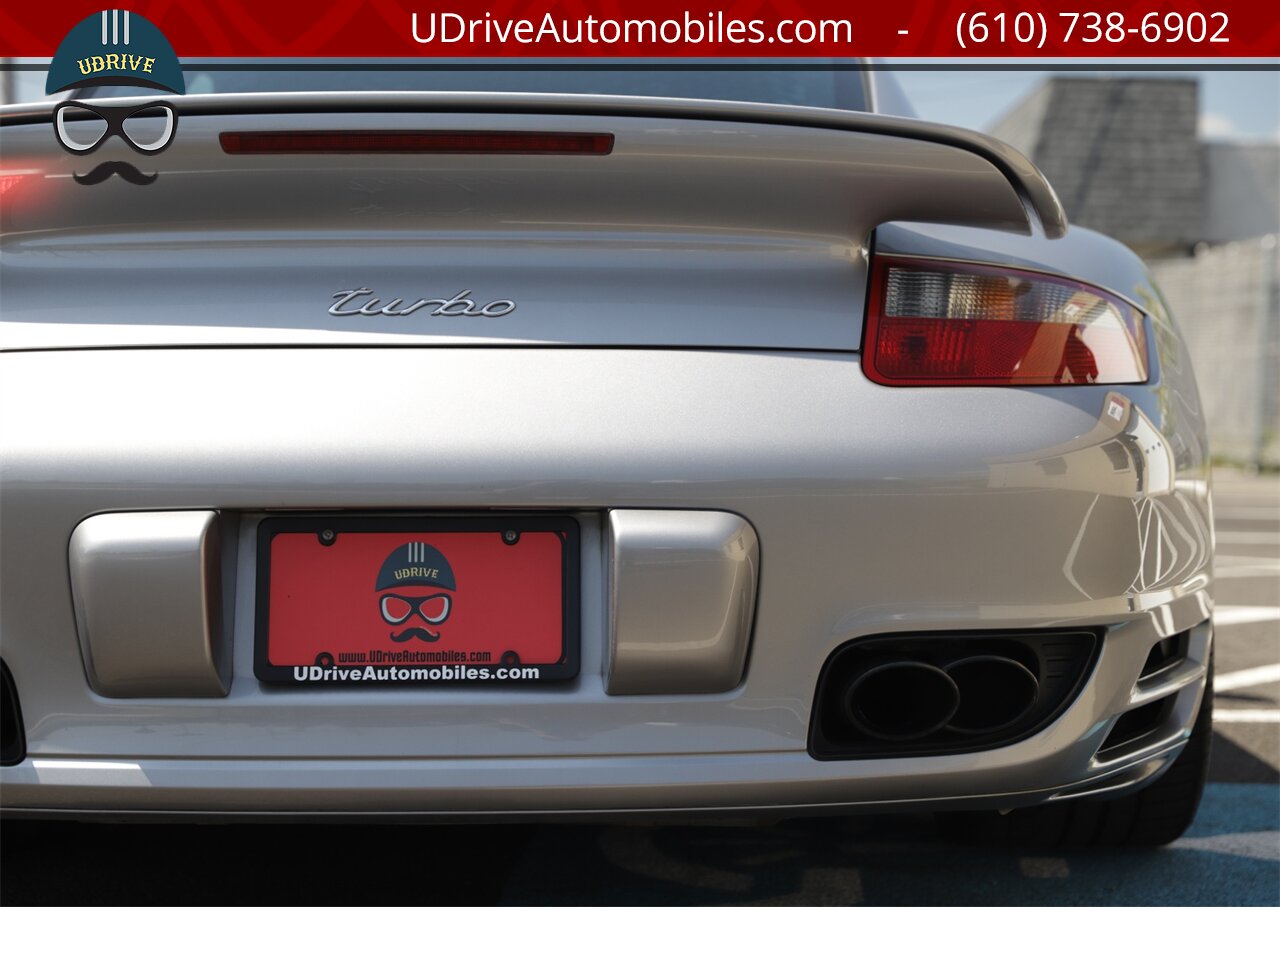 2008 Porsche 911 6 Speed Manual Turbo 997 PCCB's $149k MSRP   - Photo 19 - West Chester, PA 19382